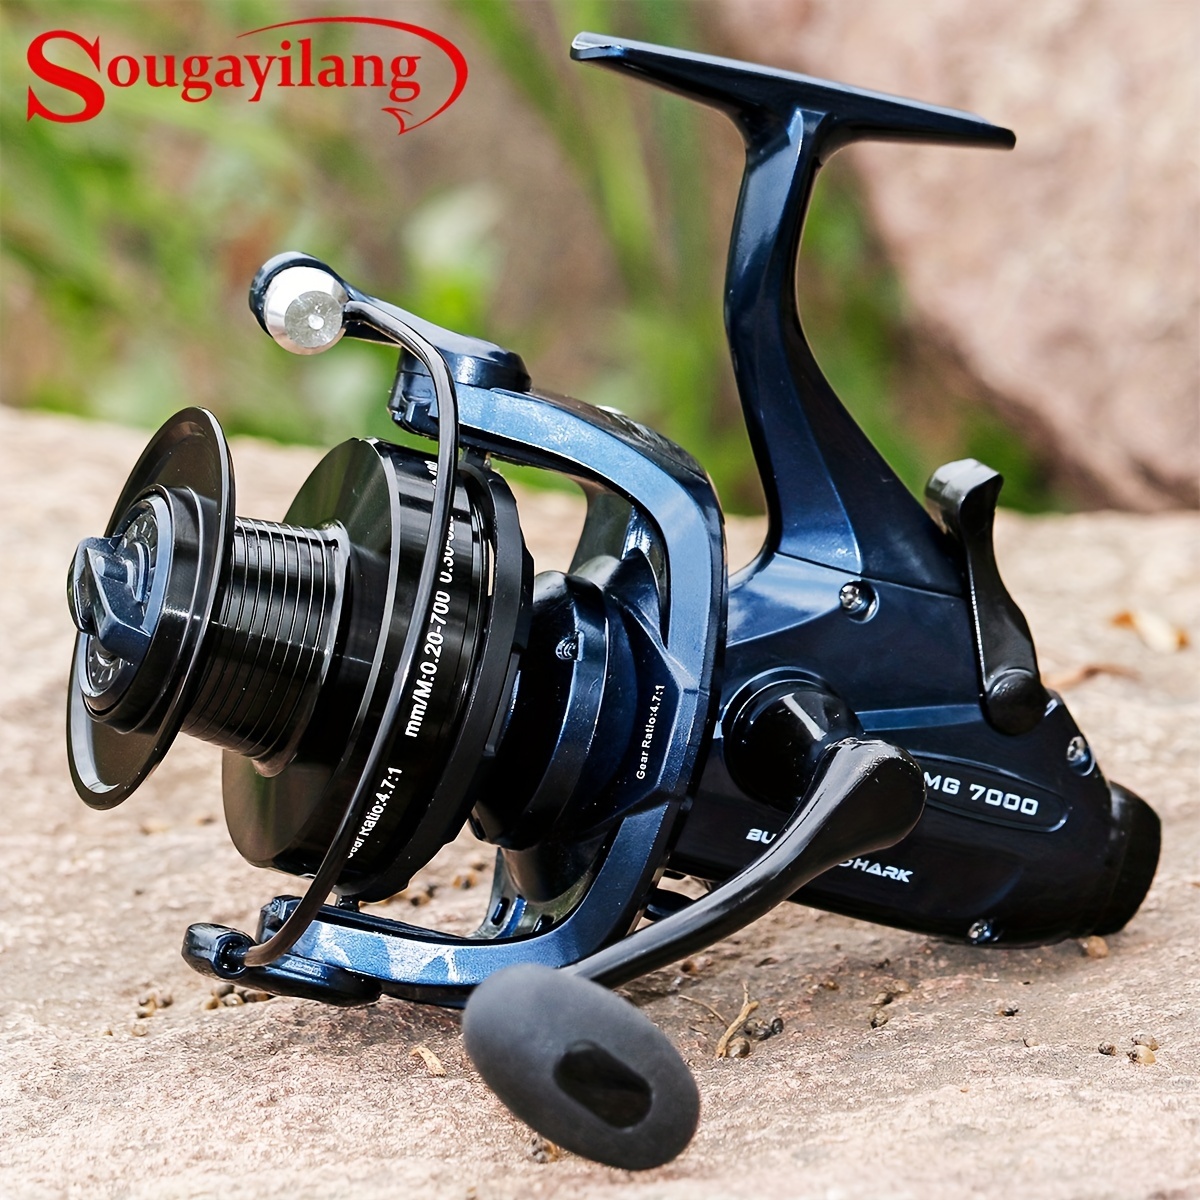 Sougayilang 4.7:1 Gear Ratio Fishing Reel, 13+1BB Spinning Reel With  10kg/22lbs Strong Drag Power, Fishing Tackle For Advanced Anglers